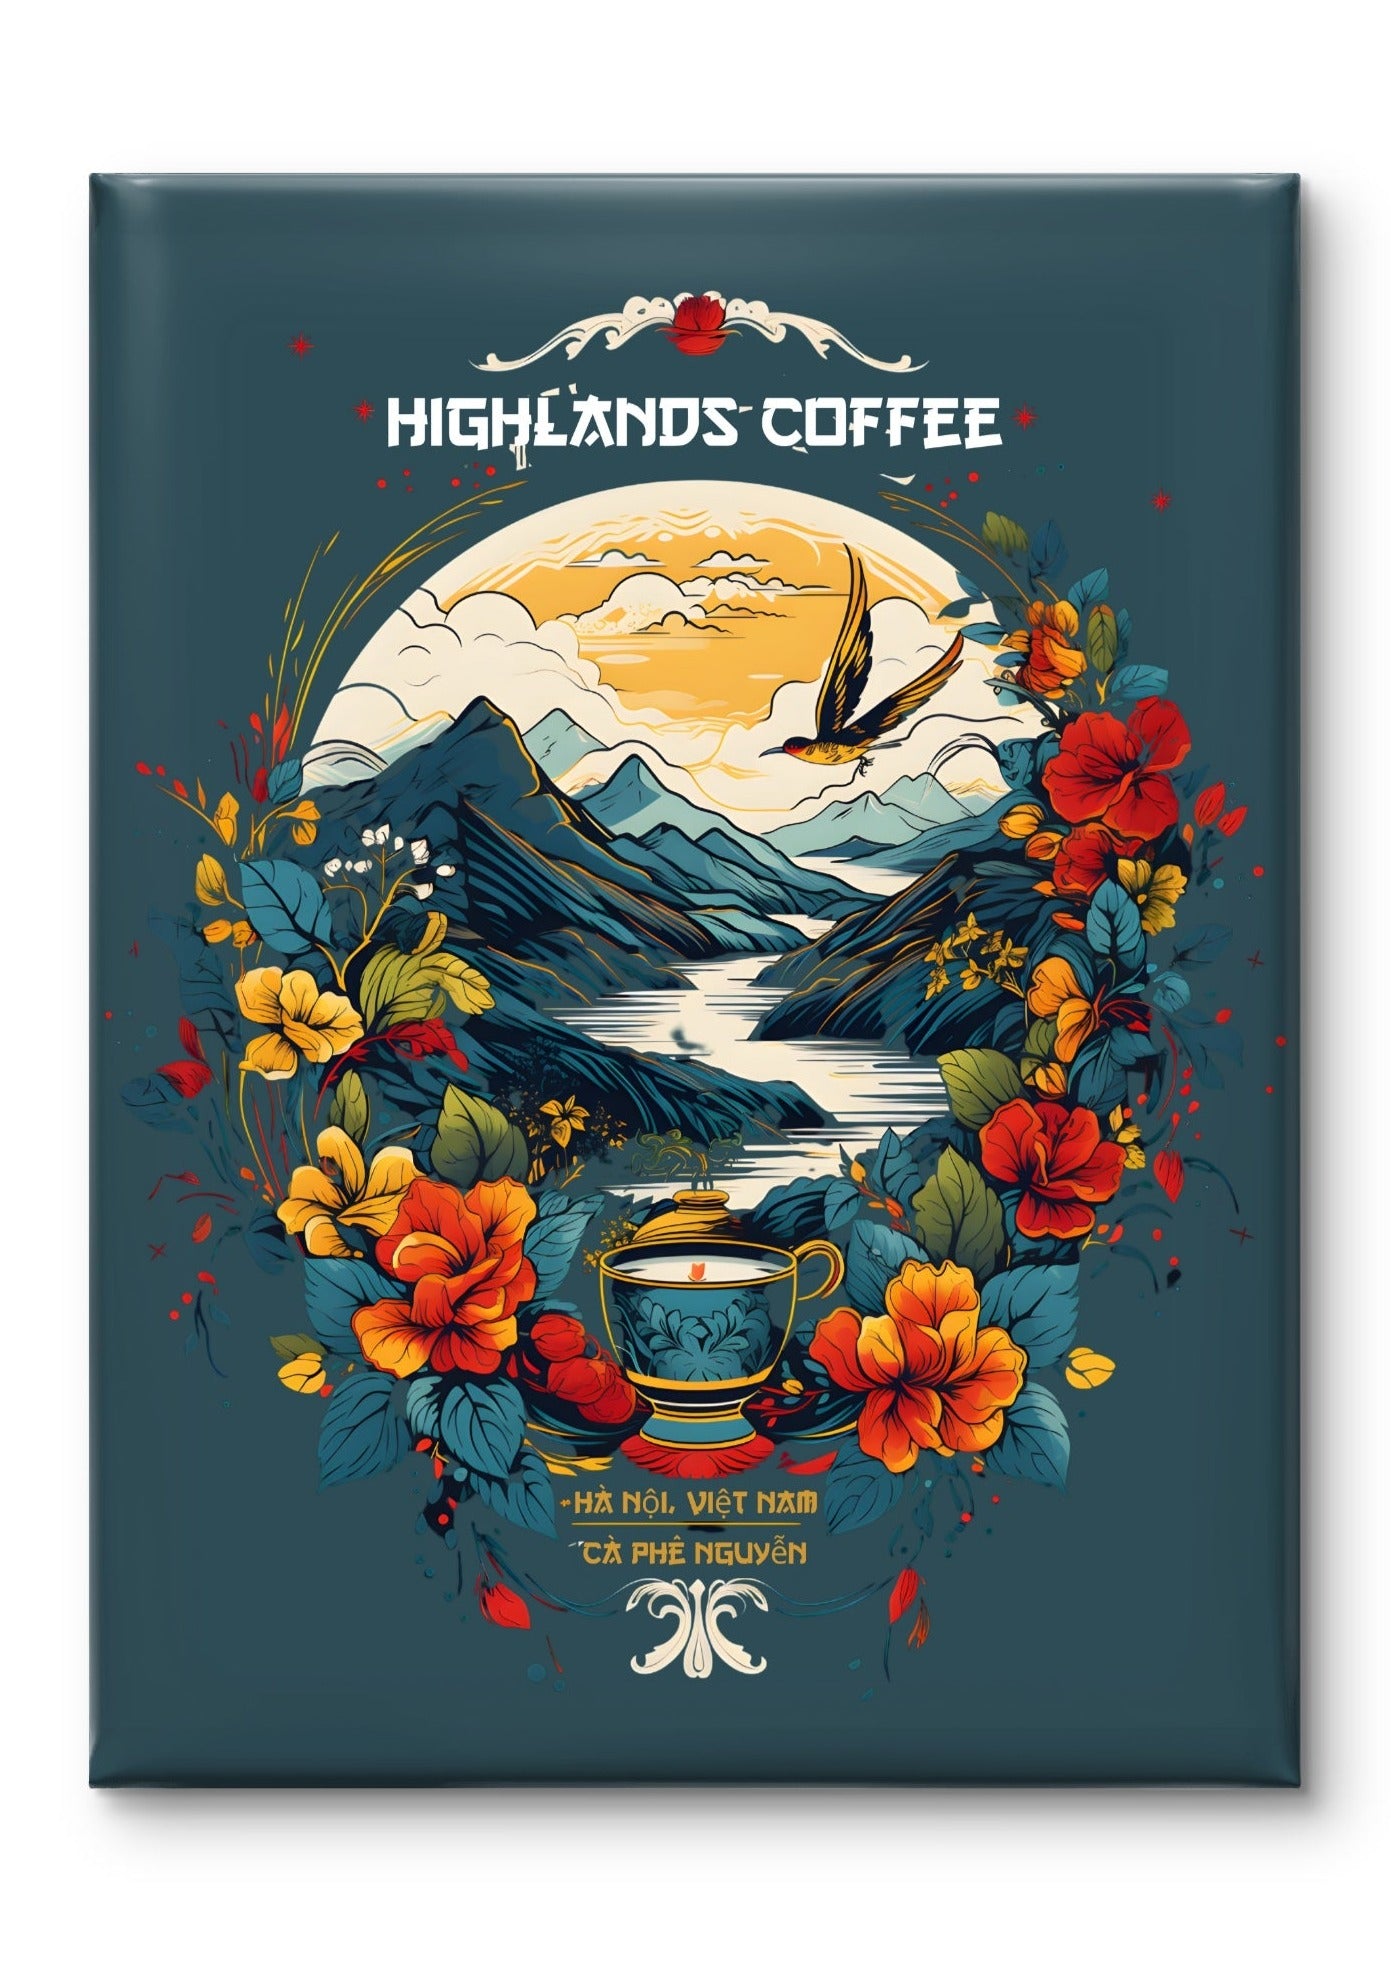 Highlands Coffee Vintage Poster by Coffee Couture